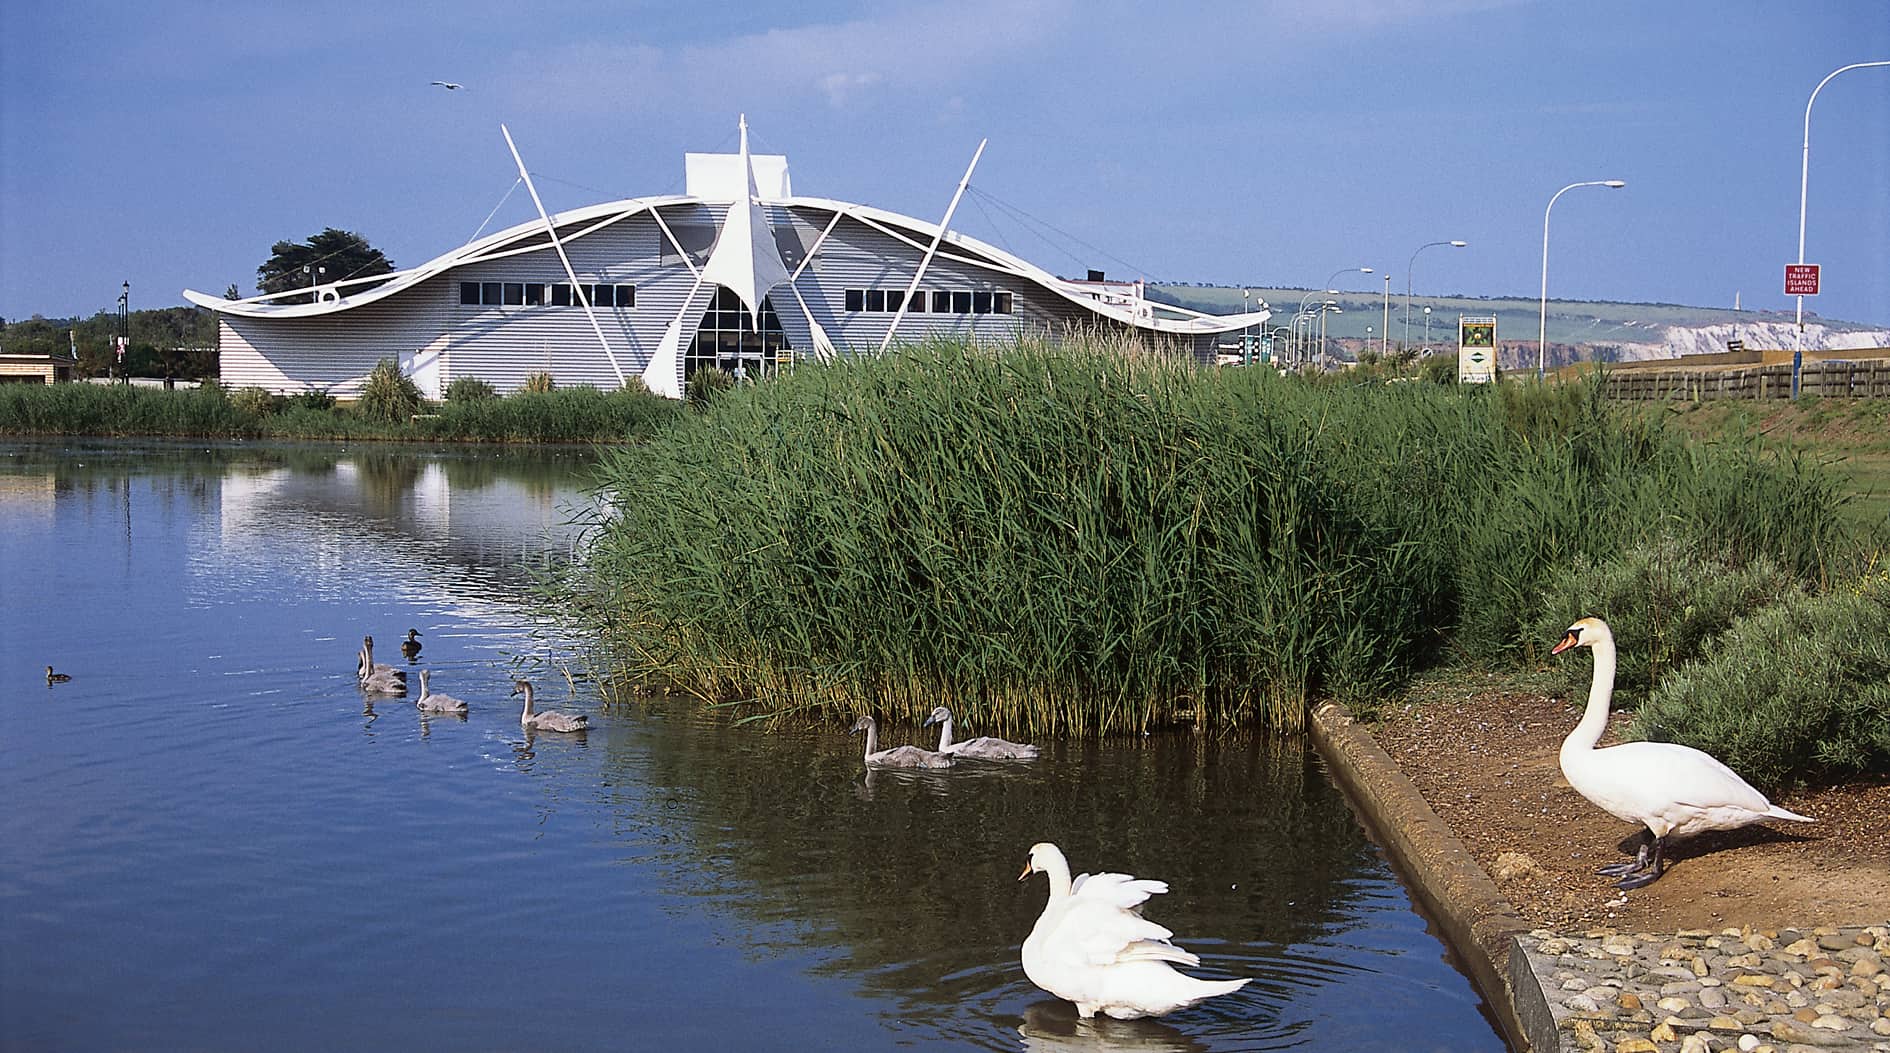 Dinosaur Isle exterior with swans in foreground